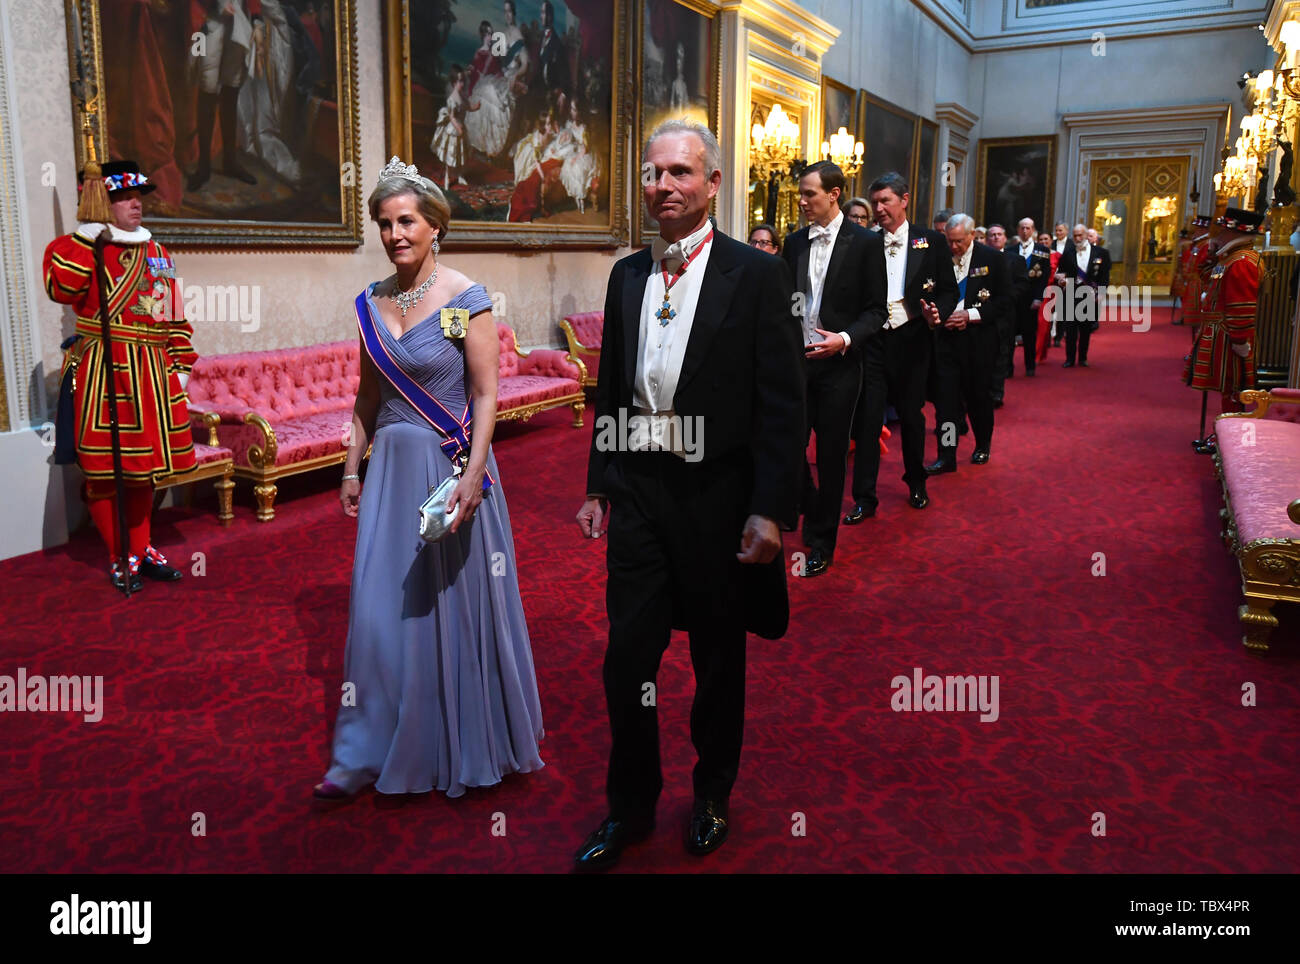 The Countess of Wessex and the Chancellor of the Duchy of Lancaster, David Lidington arrive through the East Gallery during the State Banquet at Buckingham Palace, London, on day one of the US President's three day state visit to the UK. Stock Photo